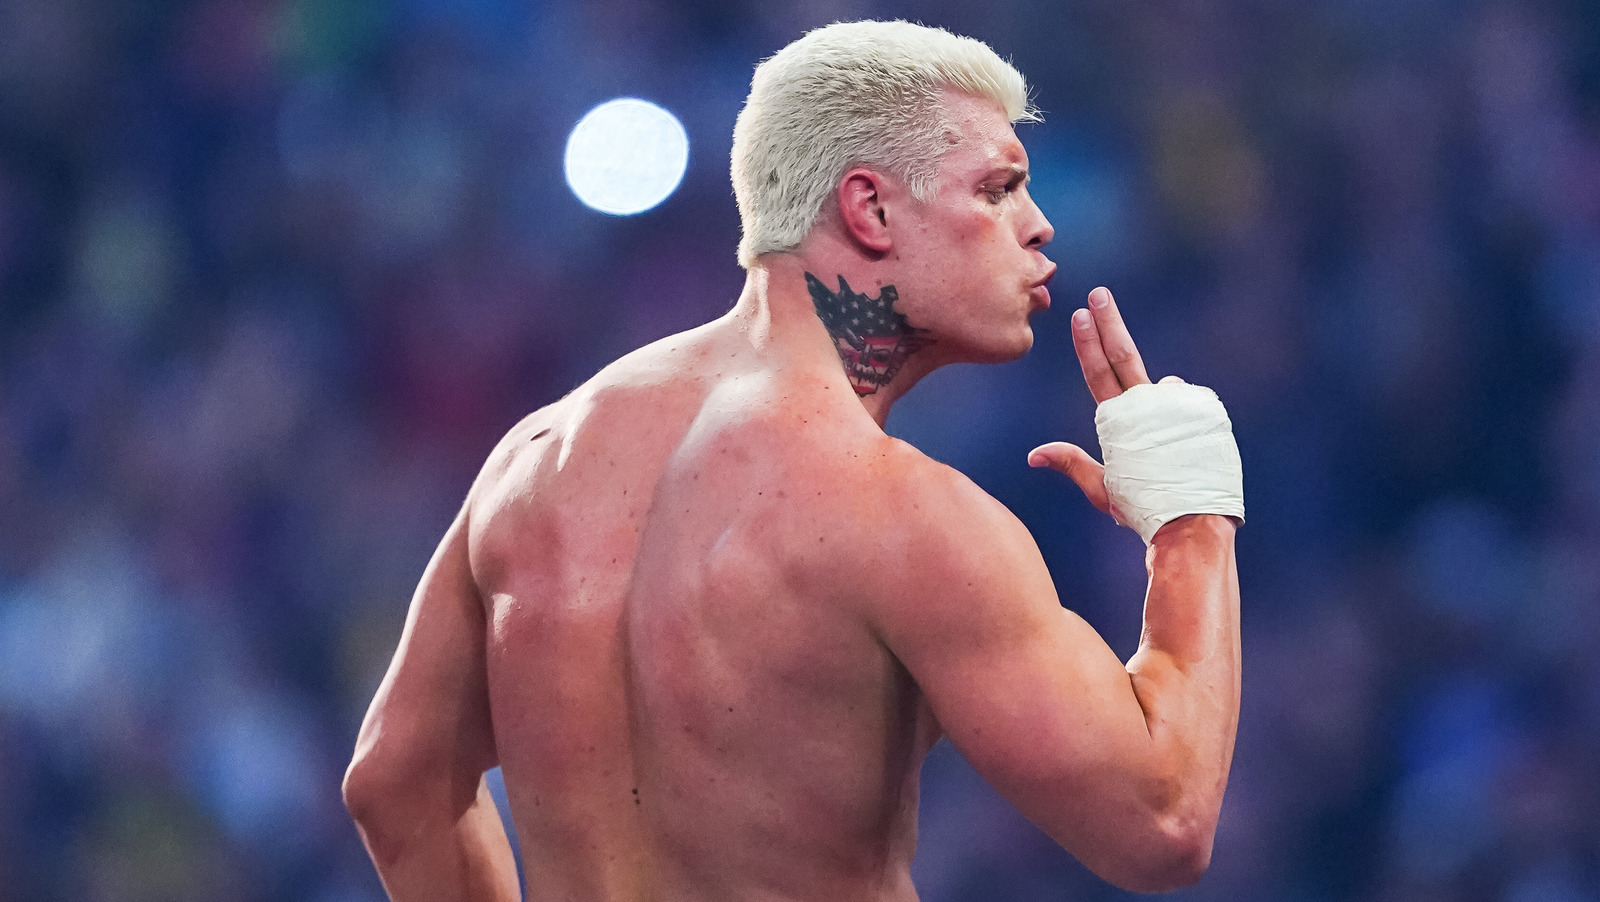 Triple H Explains Why Cody Rhodes Is The Future Of WWE 'For All The Right Reasons'